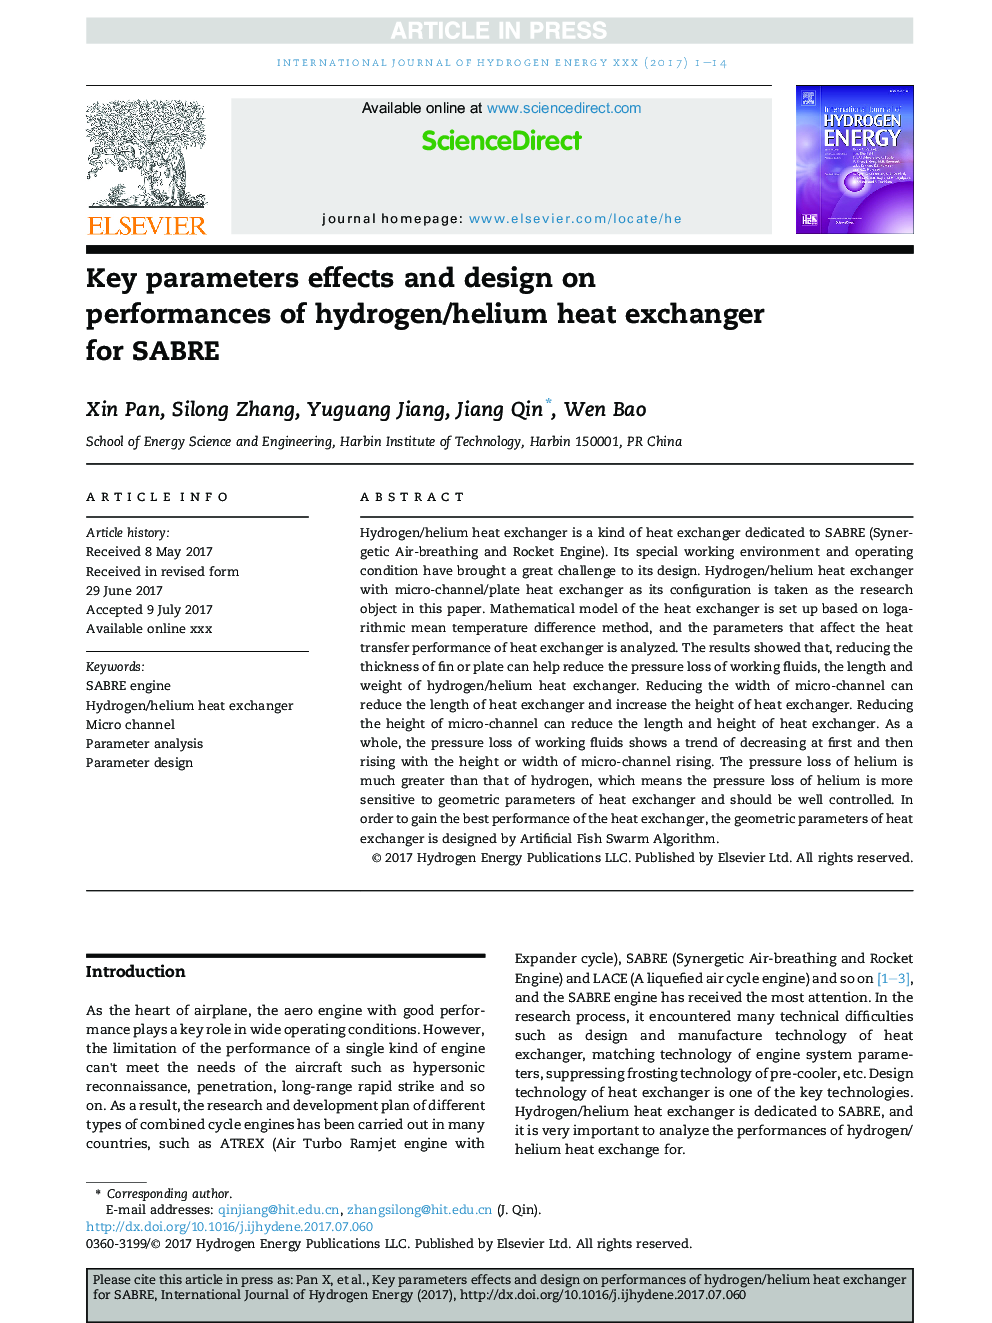 Key parameters effects and design on performances of hydrogen/helium heat exchanger for SABRE